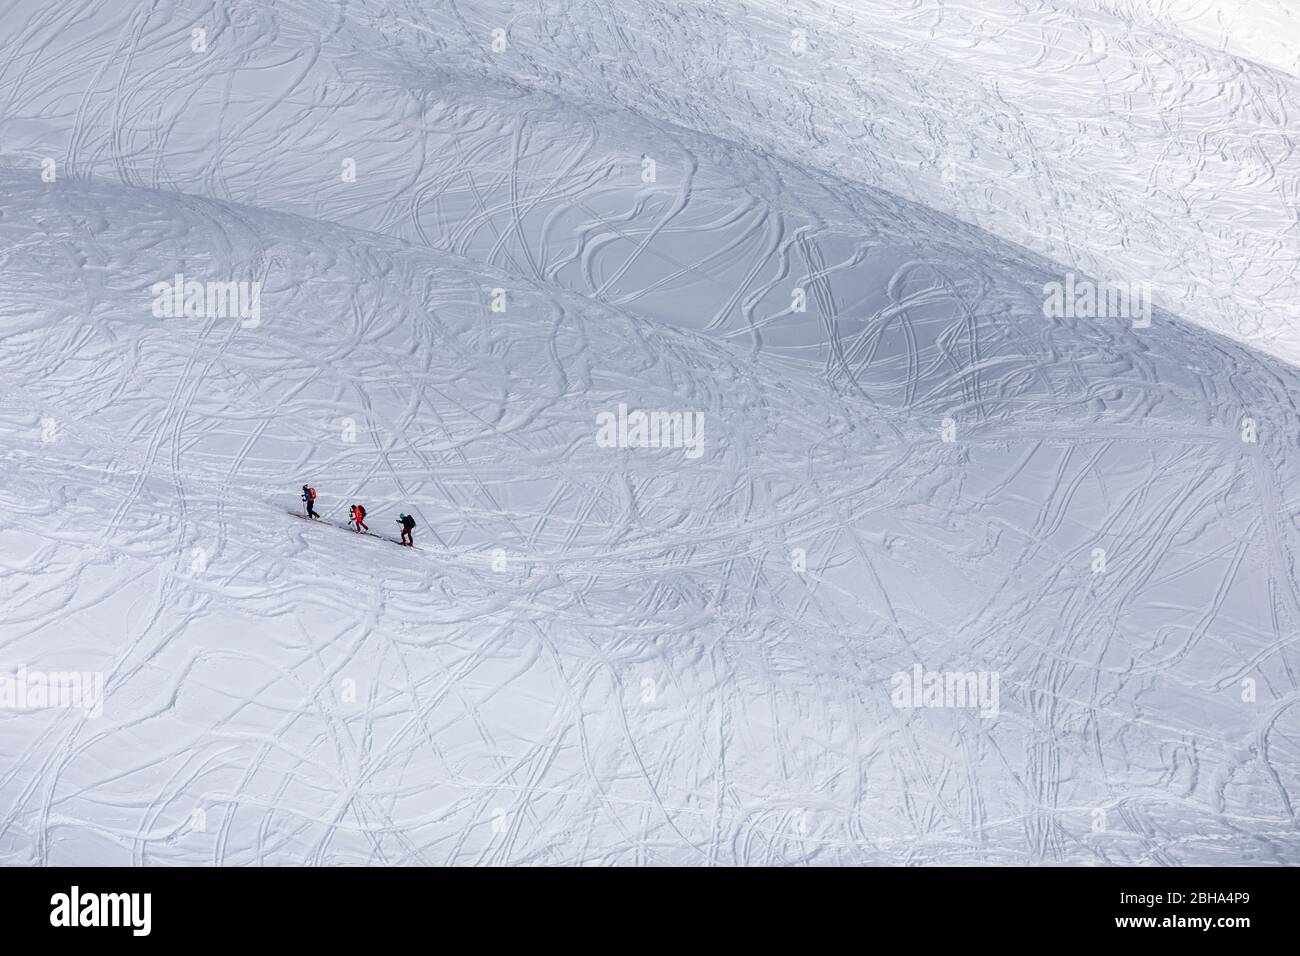 three ski mountaineers uphill on snow drawn by skiers' trails, Monte Alto (High Man), Hohe Tauern, Casies valley / Gsieser valley, South Tyrol, Italy Stock Photo